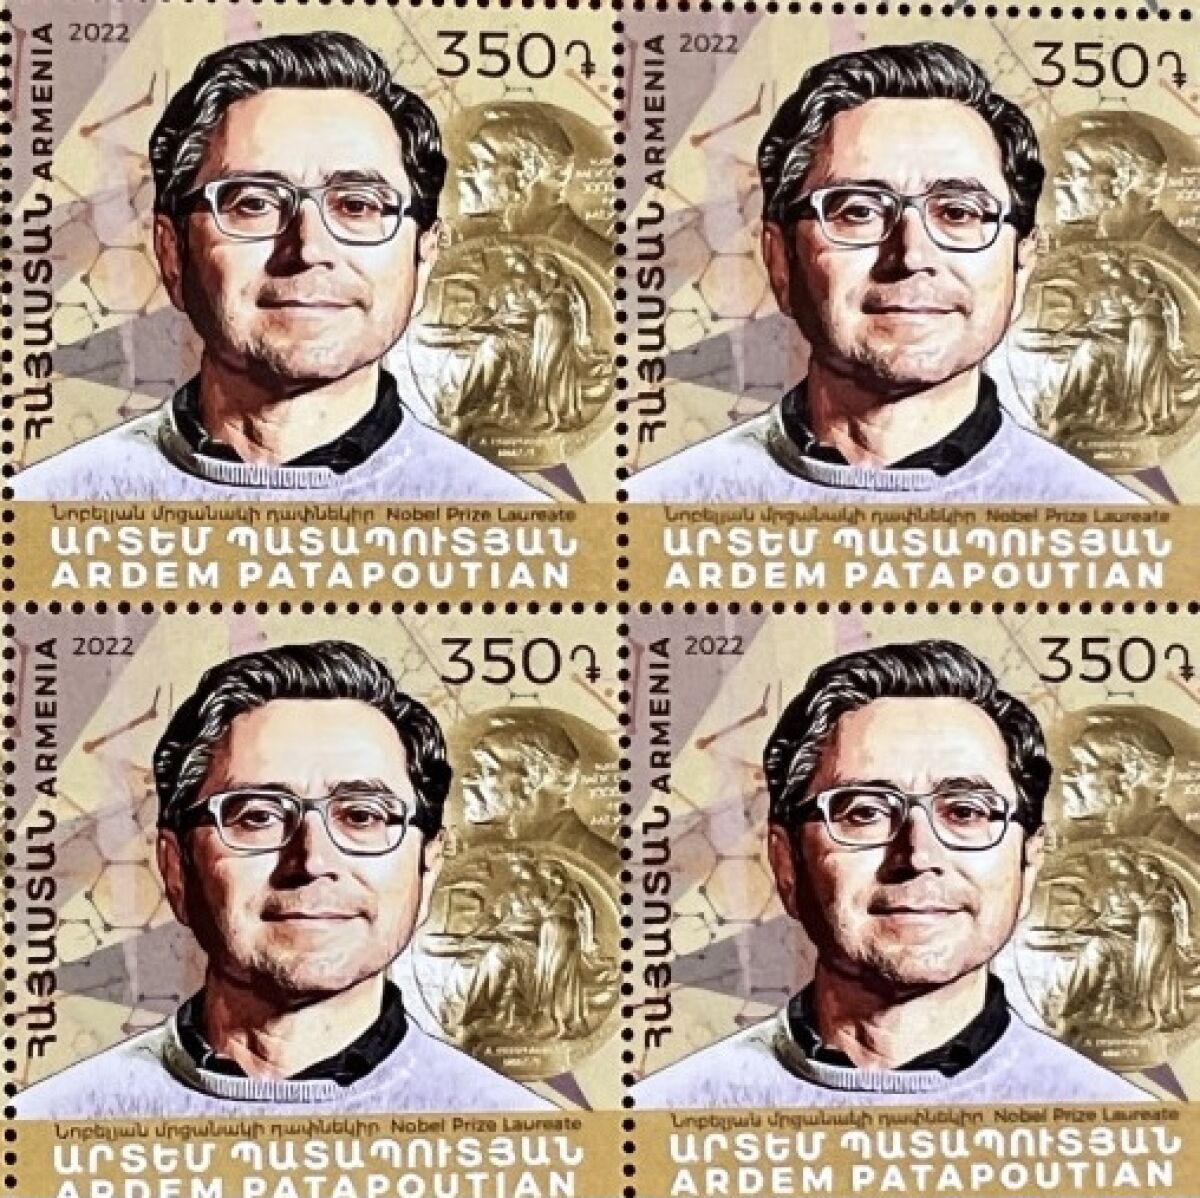 Armenia issues postage stamp honoring Ardem Patapoutian